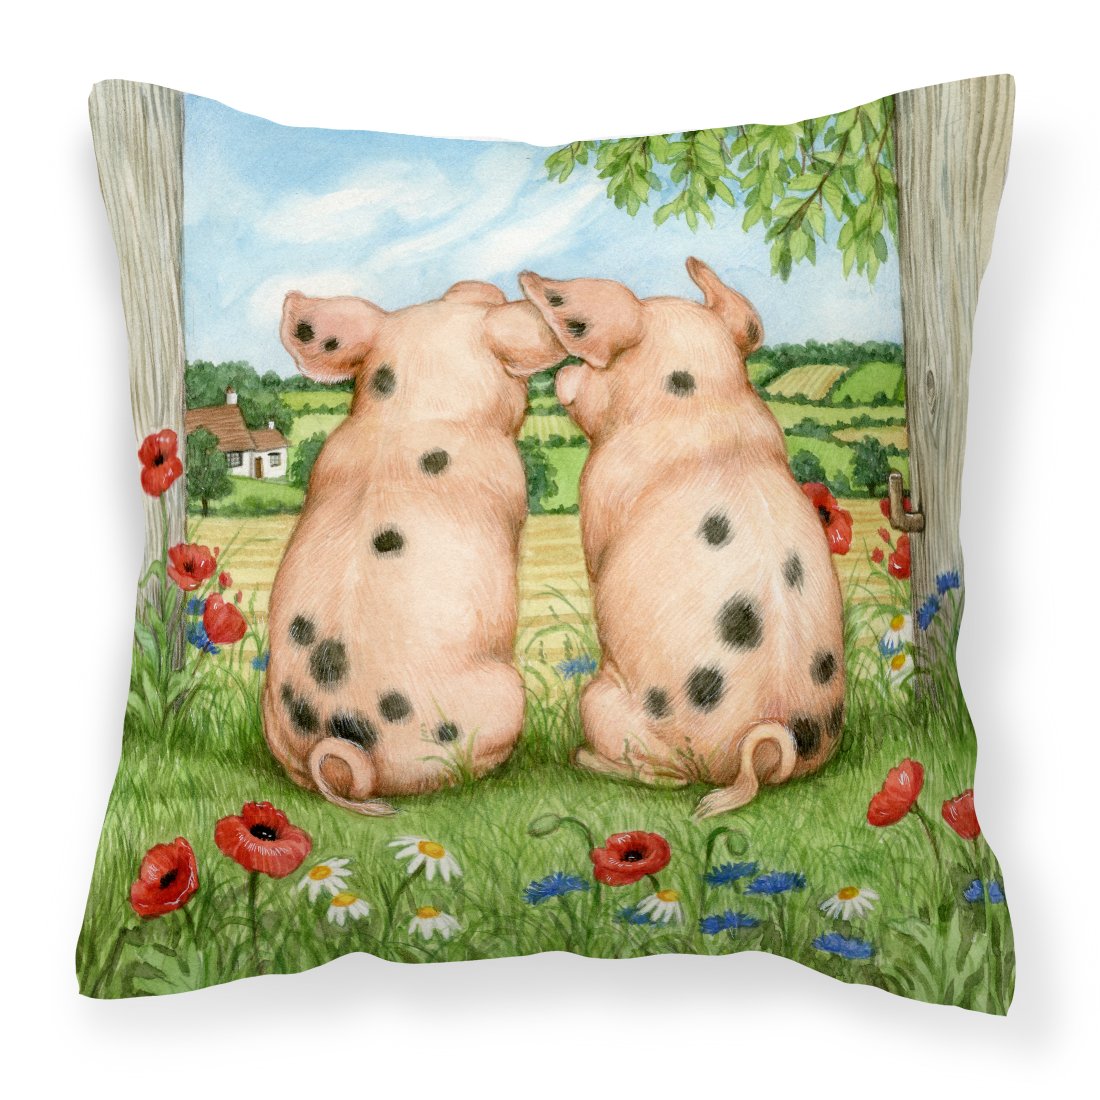 Pigs Side By Side by Debbie Cook Canvas Decorative Pillow by Caroline's Treasures